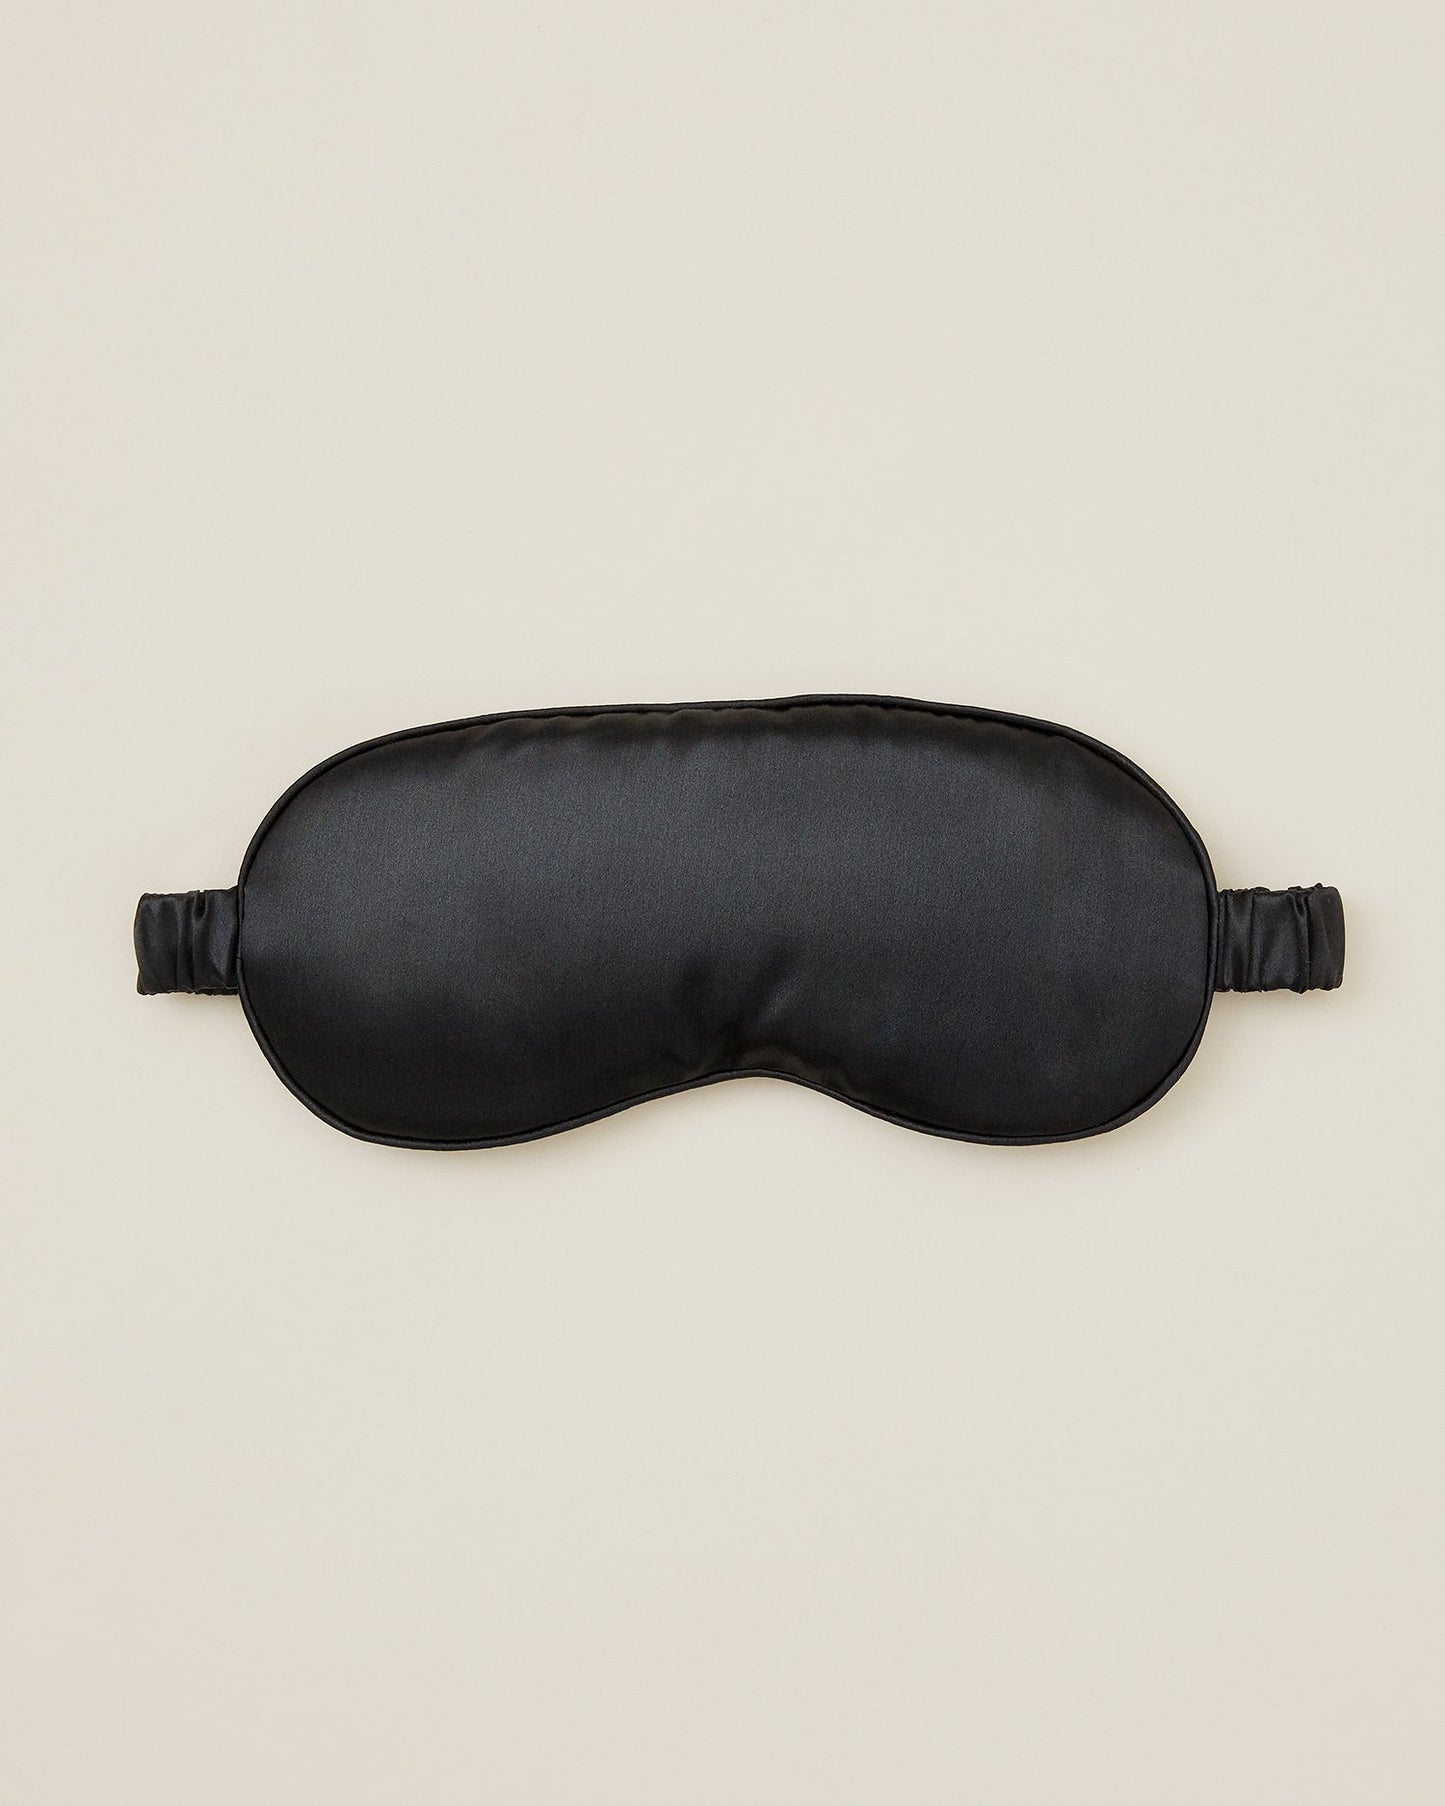 Elegant sleep mask made from the finest silk